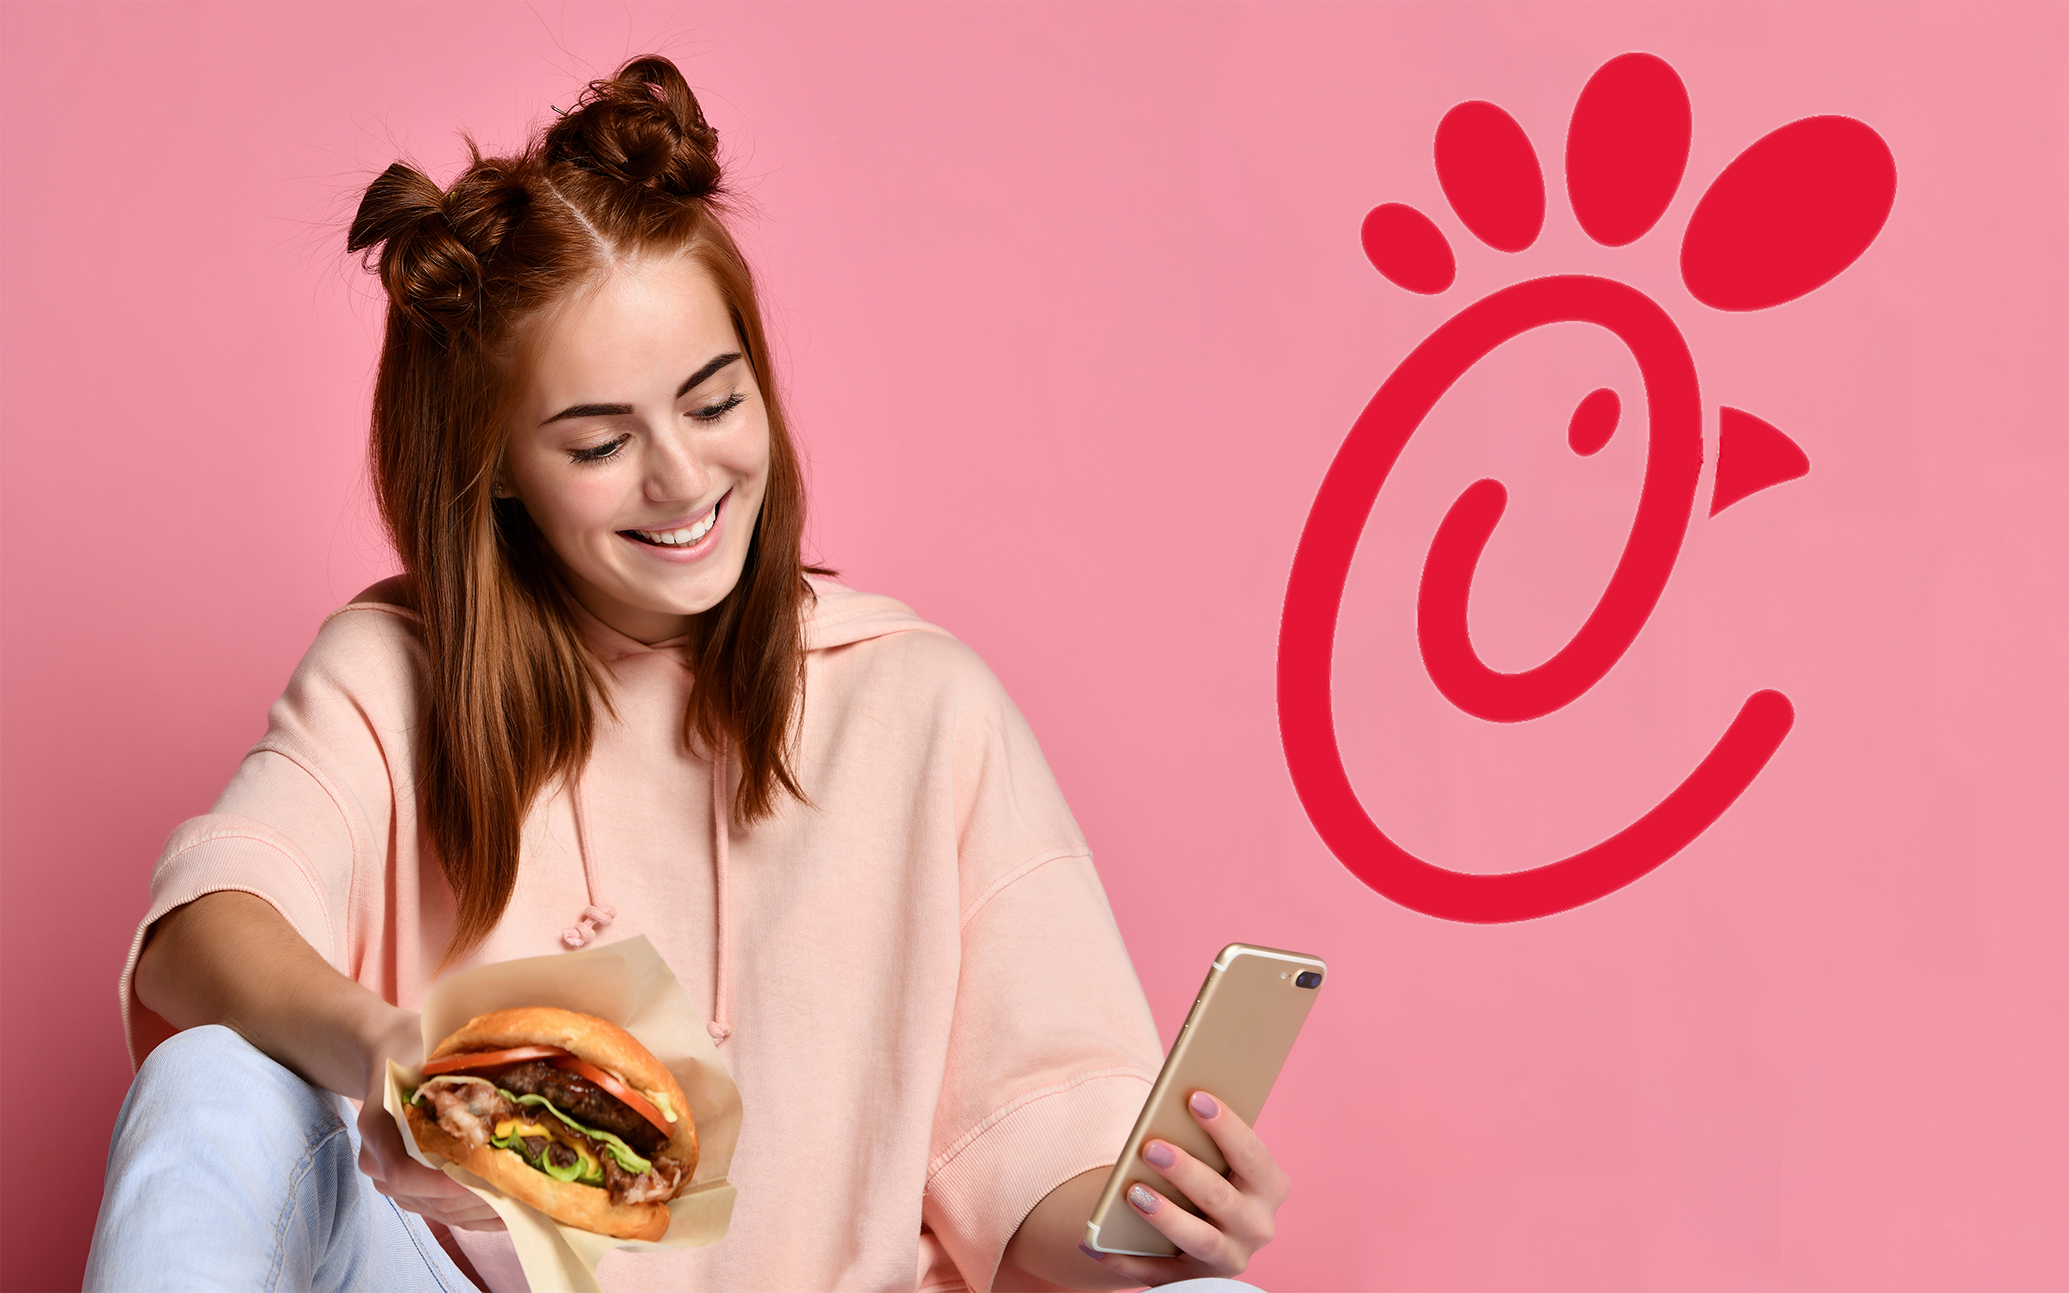 Why women love Chick-fil-A more than 50 Shades of Grey.